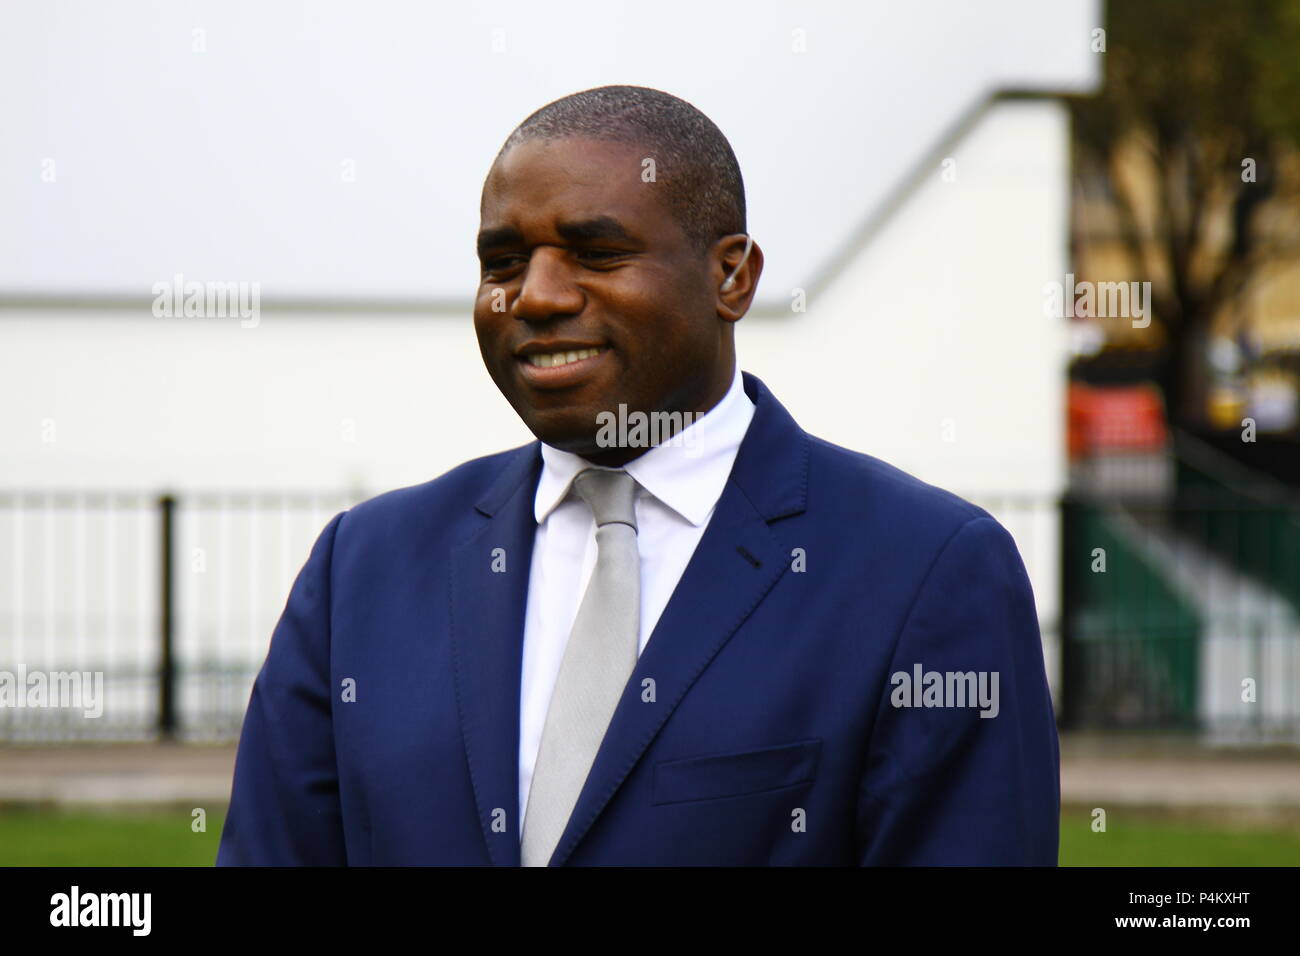 David Lammy British Labour party MP pictured on College Green, Westminster , London, UK on 4th March 2015. British Politicians. MPS. Russell Moore portfolio page. Stock Photo